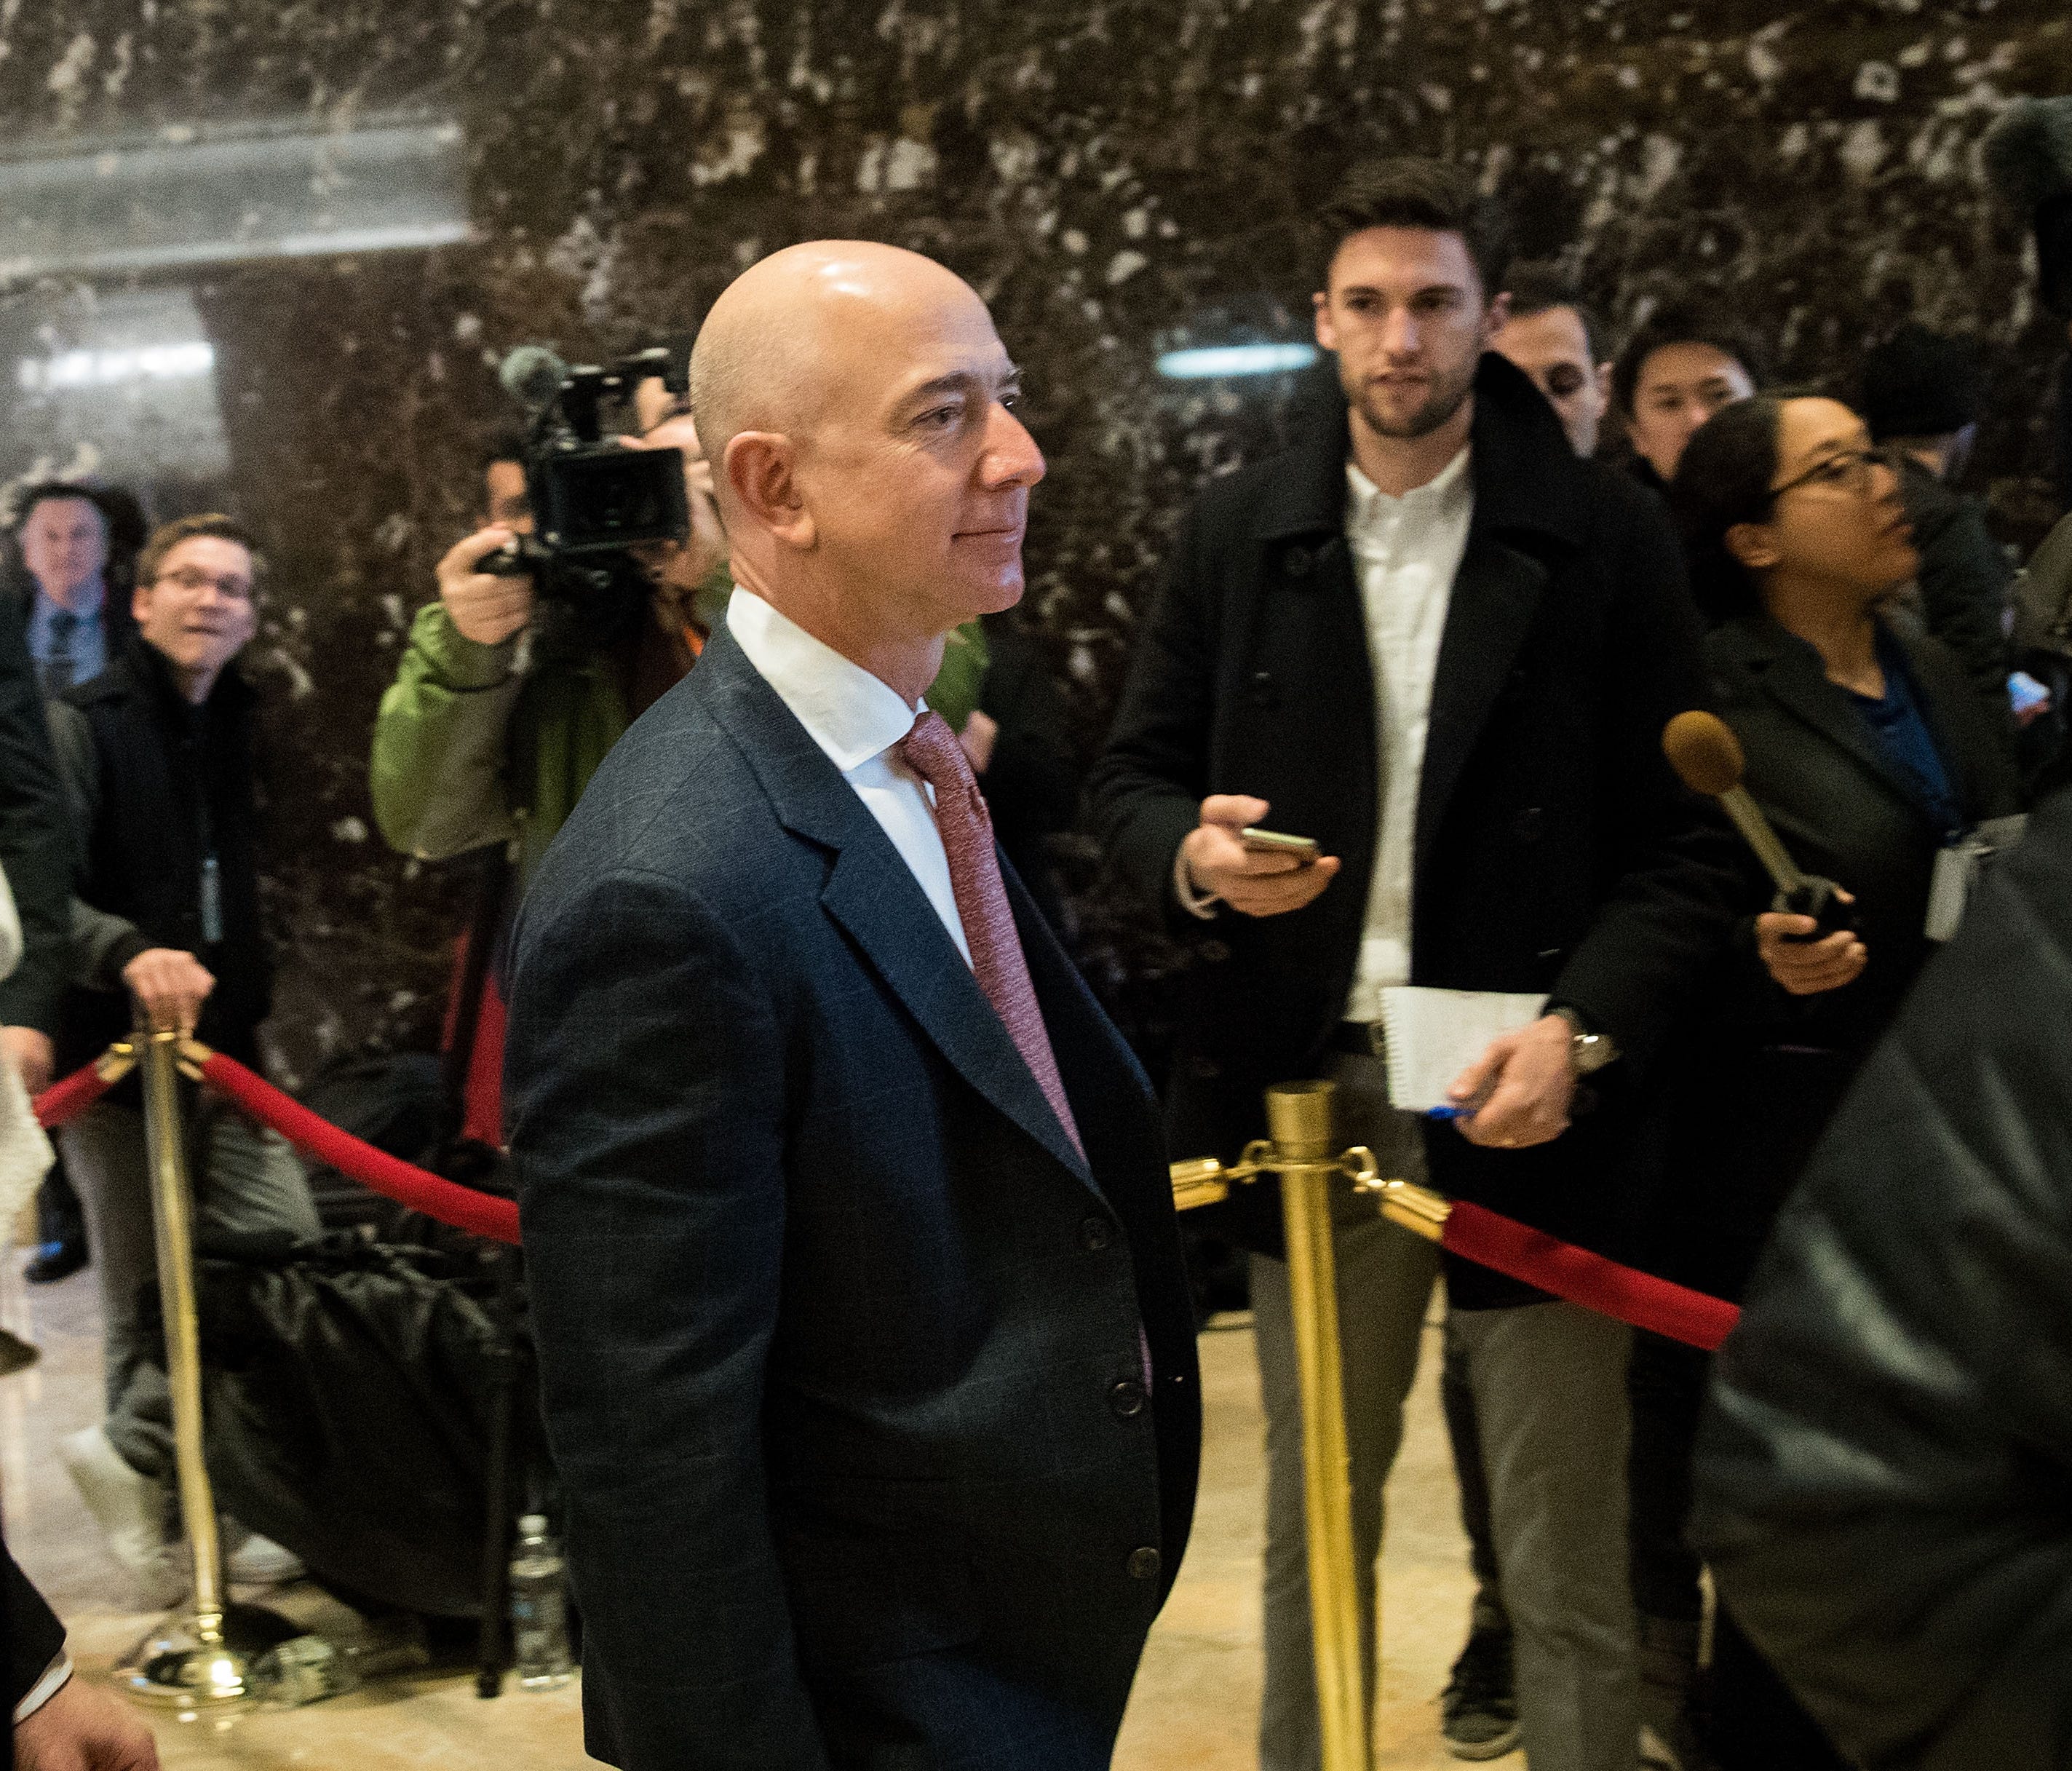 Jeff Bezos, chief executive officer of Amazon, arrives for a meeting with then President-elect Donald Trump in December.